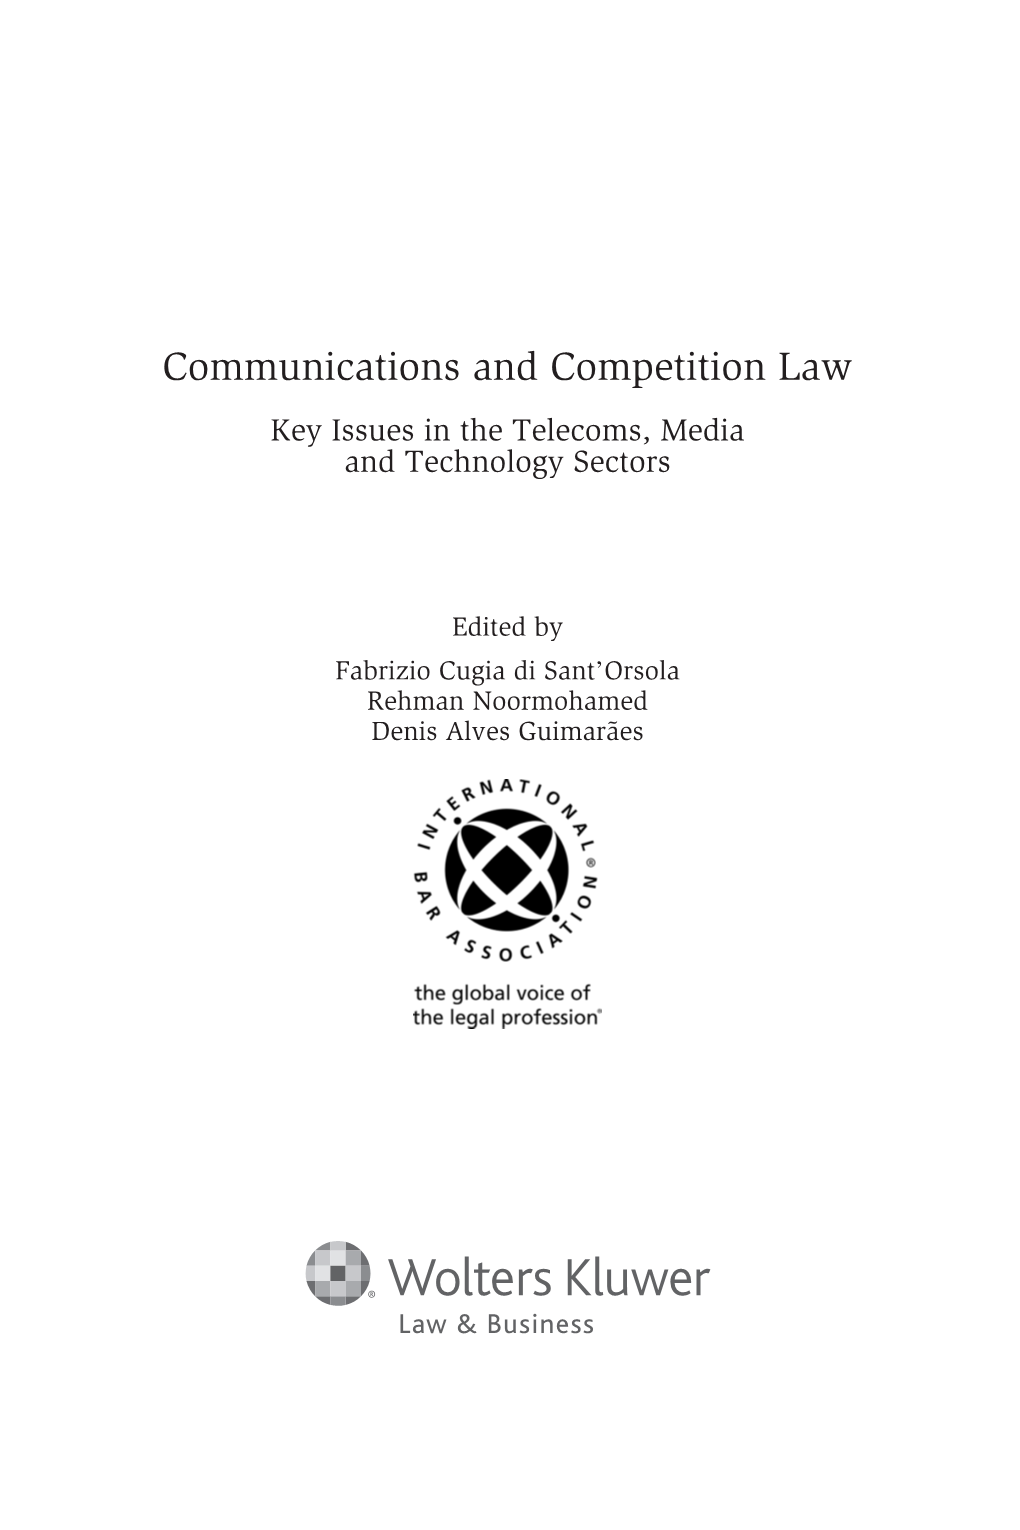 Communications and Competition Law Key Issues in the Telecoms, Media and Technology Sectors